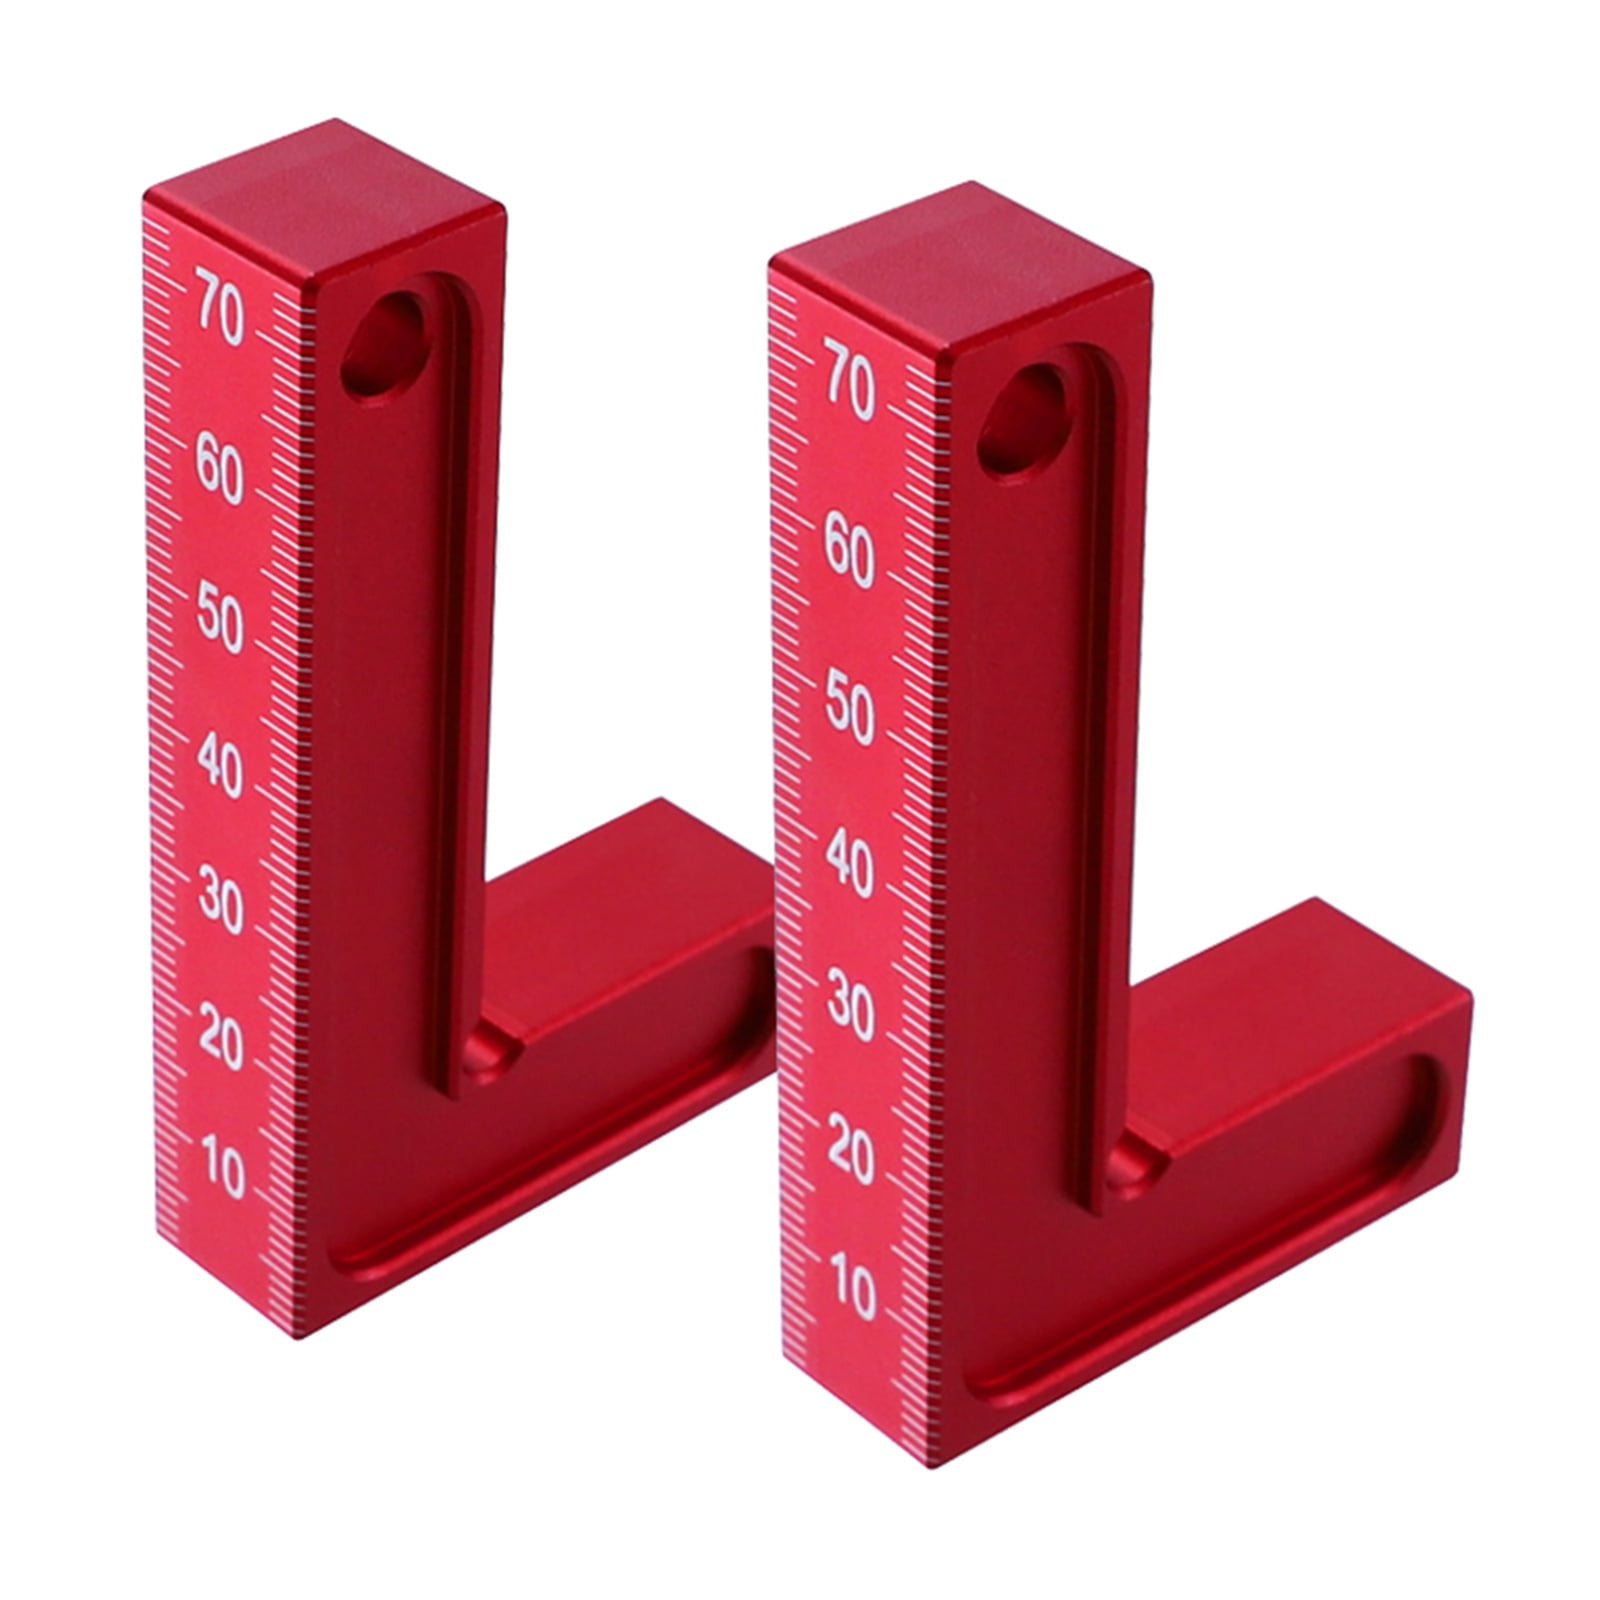 OOKWE 90 Degree Alloy Tool L Shape Corner Clamping Square Right Angle ...